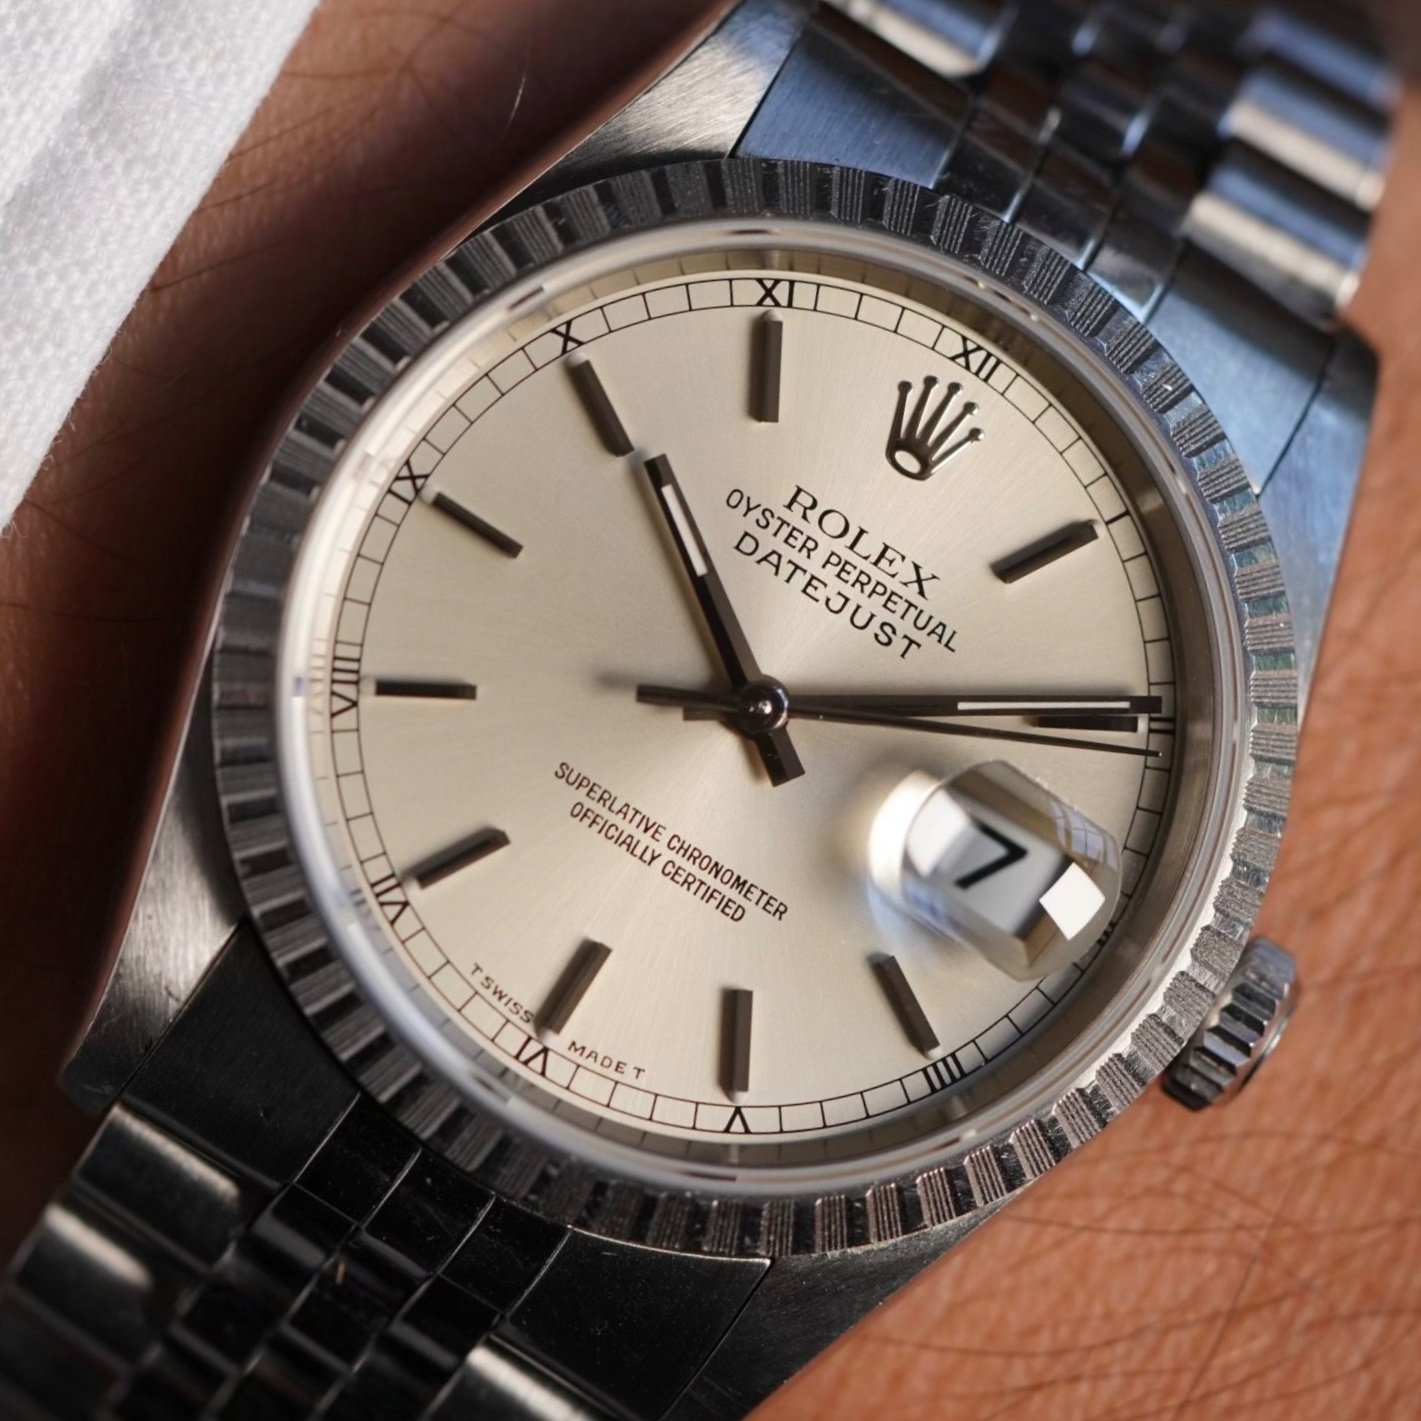 Rolex Datejust Reference 16220 Unpolished